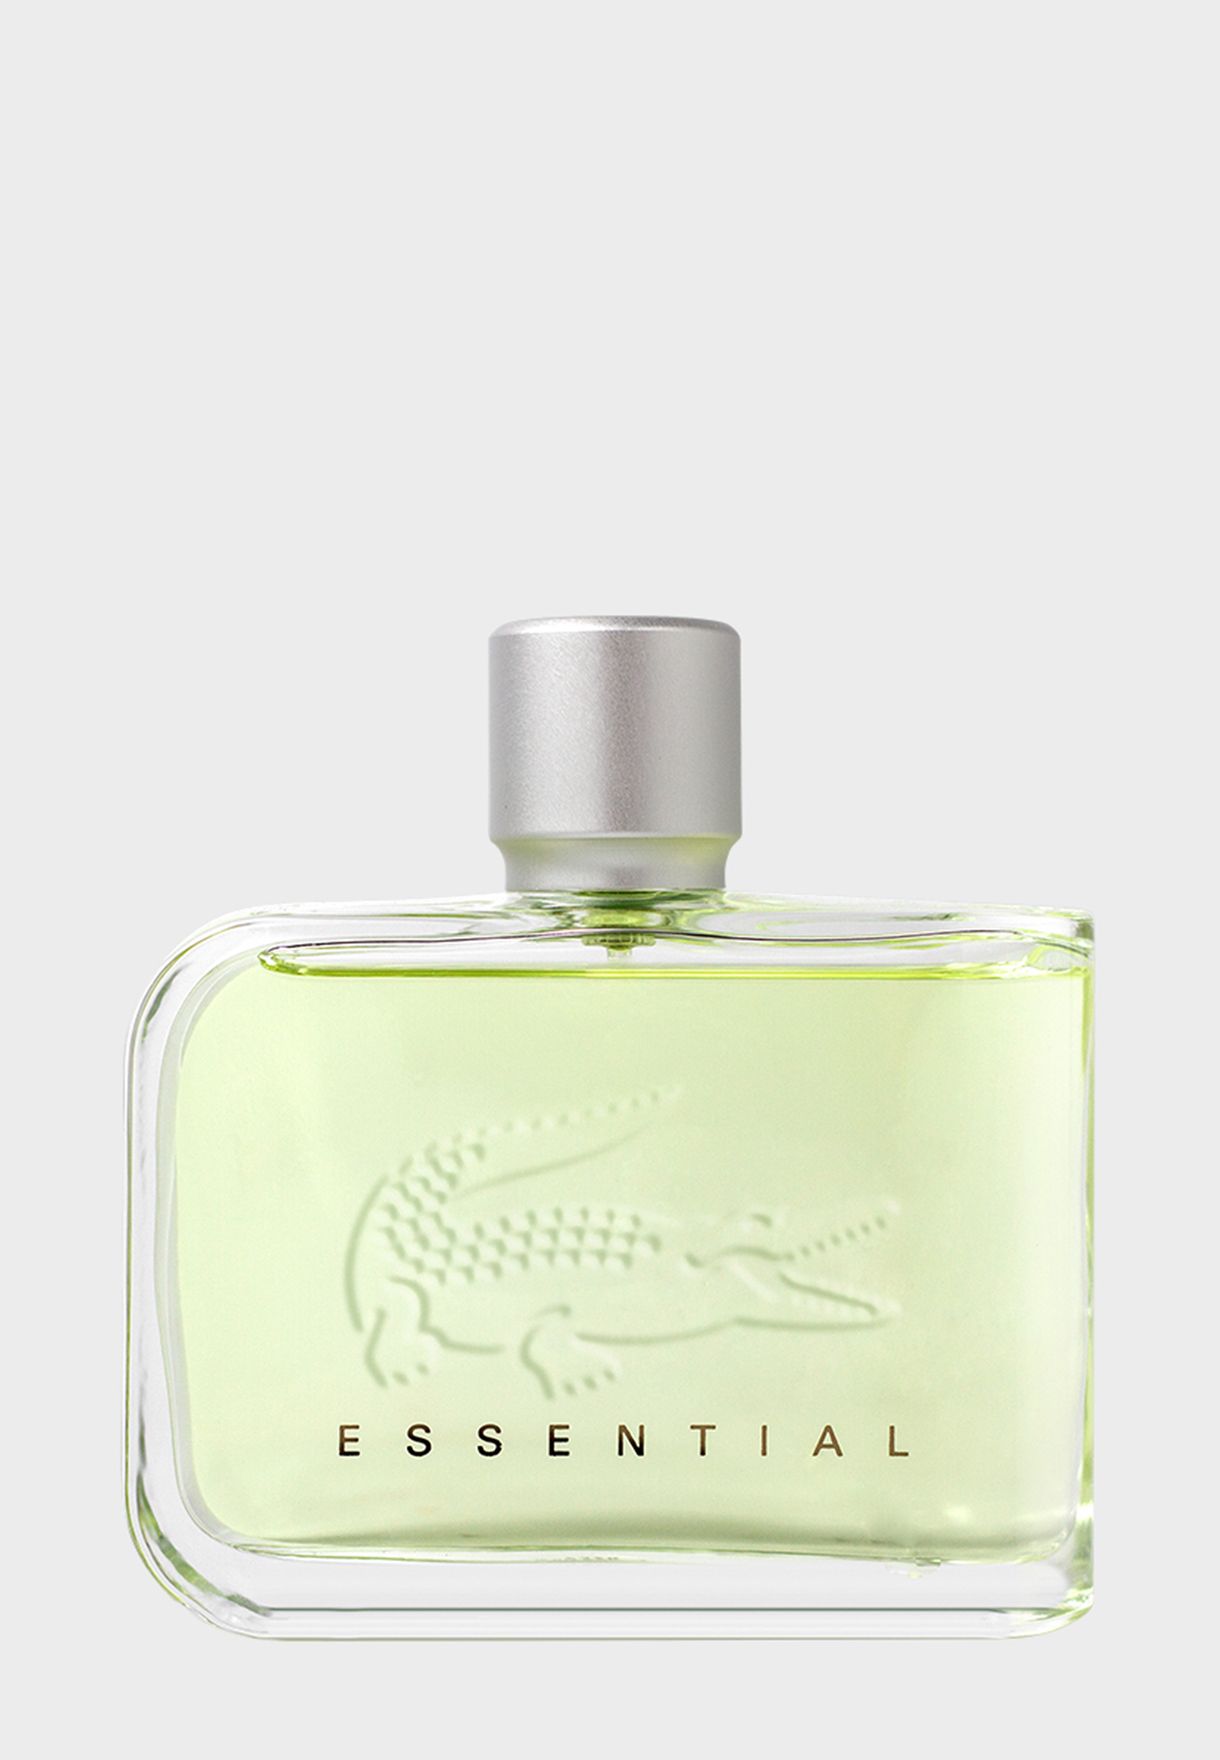 Medic Betaling trist AJF,lacoste essential perfume price in india,nalan.com.sg